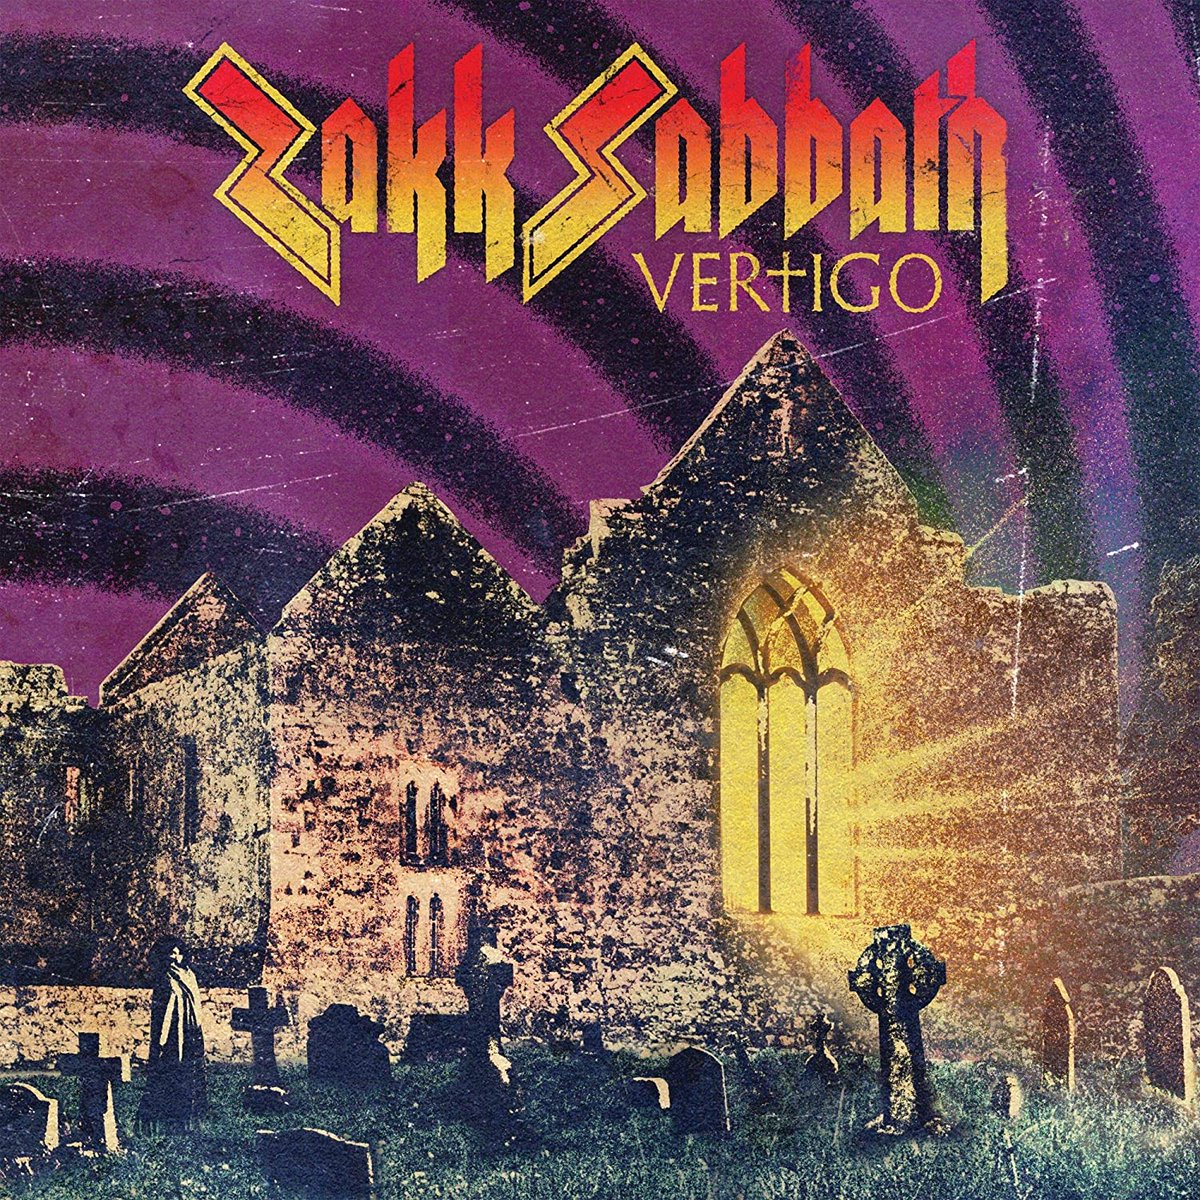 My overdue and lengthy article/review of @zakk_sabbath
's VERTIGO tribute to @BlackSabbath
 released on @magnetic_eye
 is now live on my blog. Please have a read and re-tweet/follow if you enjoy! harbingerofdoom1.blogspot.com #BlackSabbath #ZakkSabbath #Doom #Metal #SabbathWorship